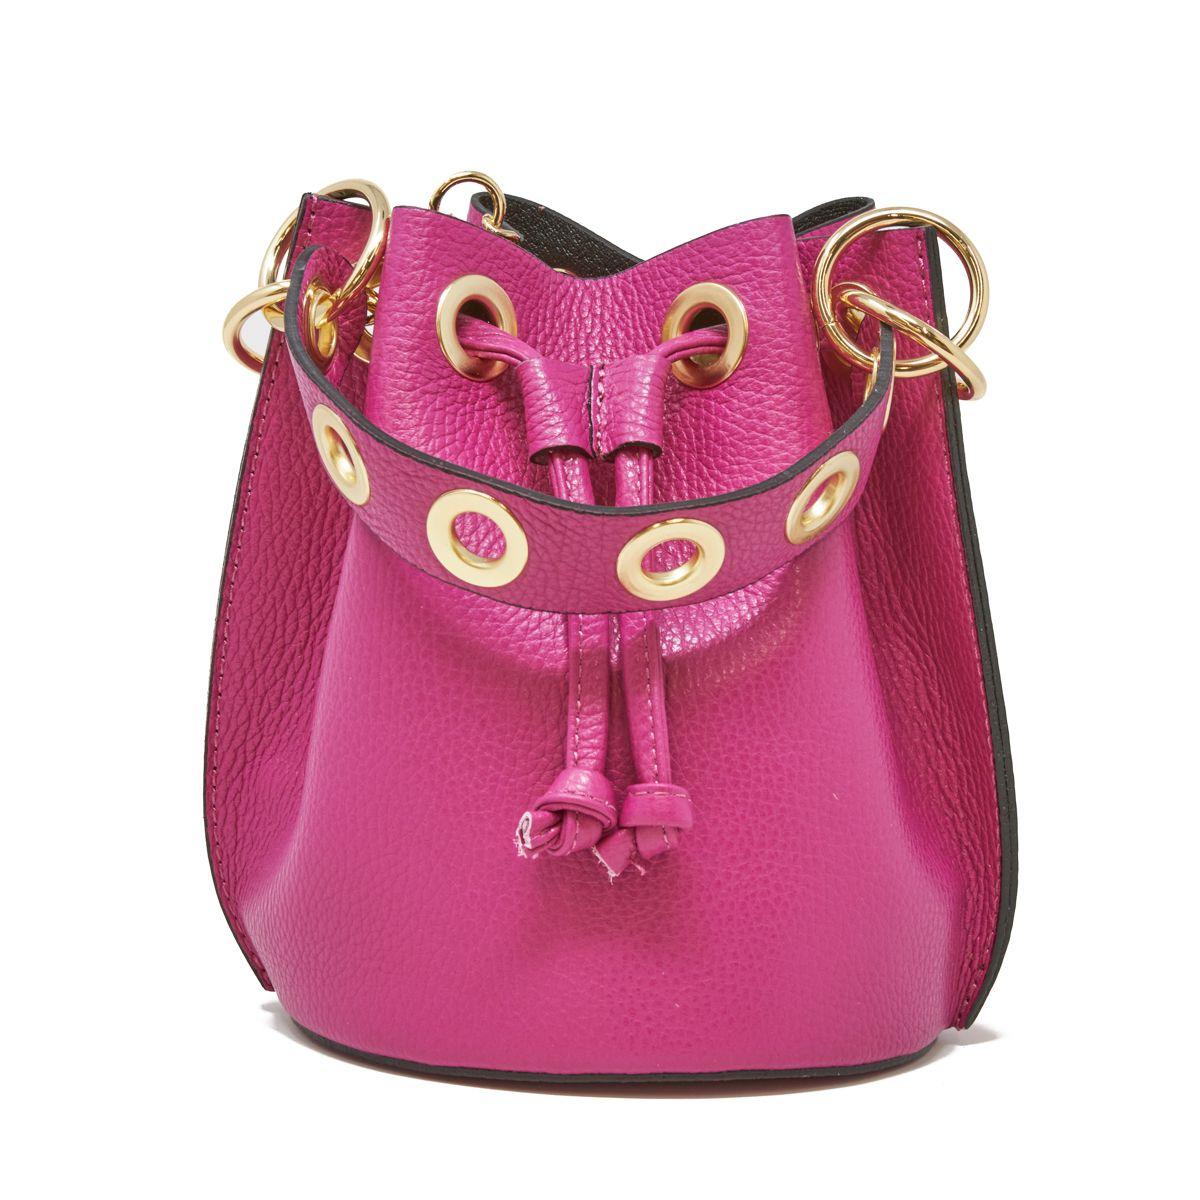 Italian Made Mini Bucket Bag-Women's Accessories-HOT PINK LEATHER-ONE SIZE-Kevin's Fine Outdoor Gear & Apparel